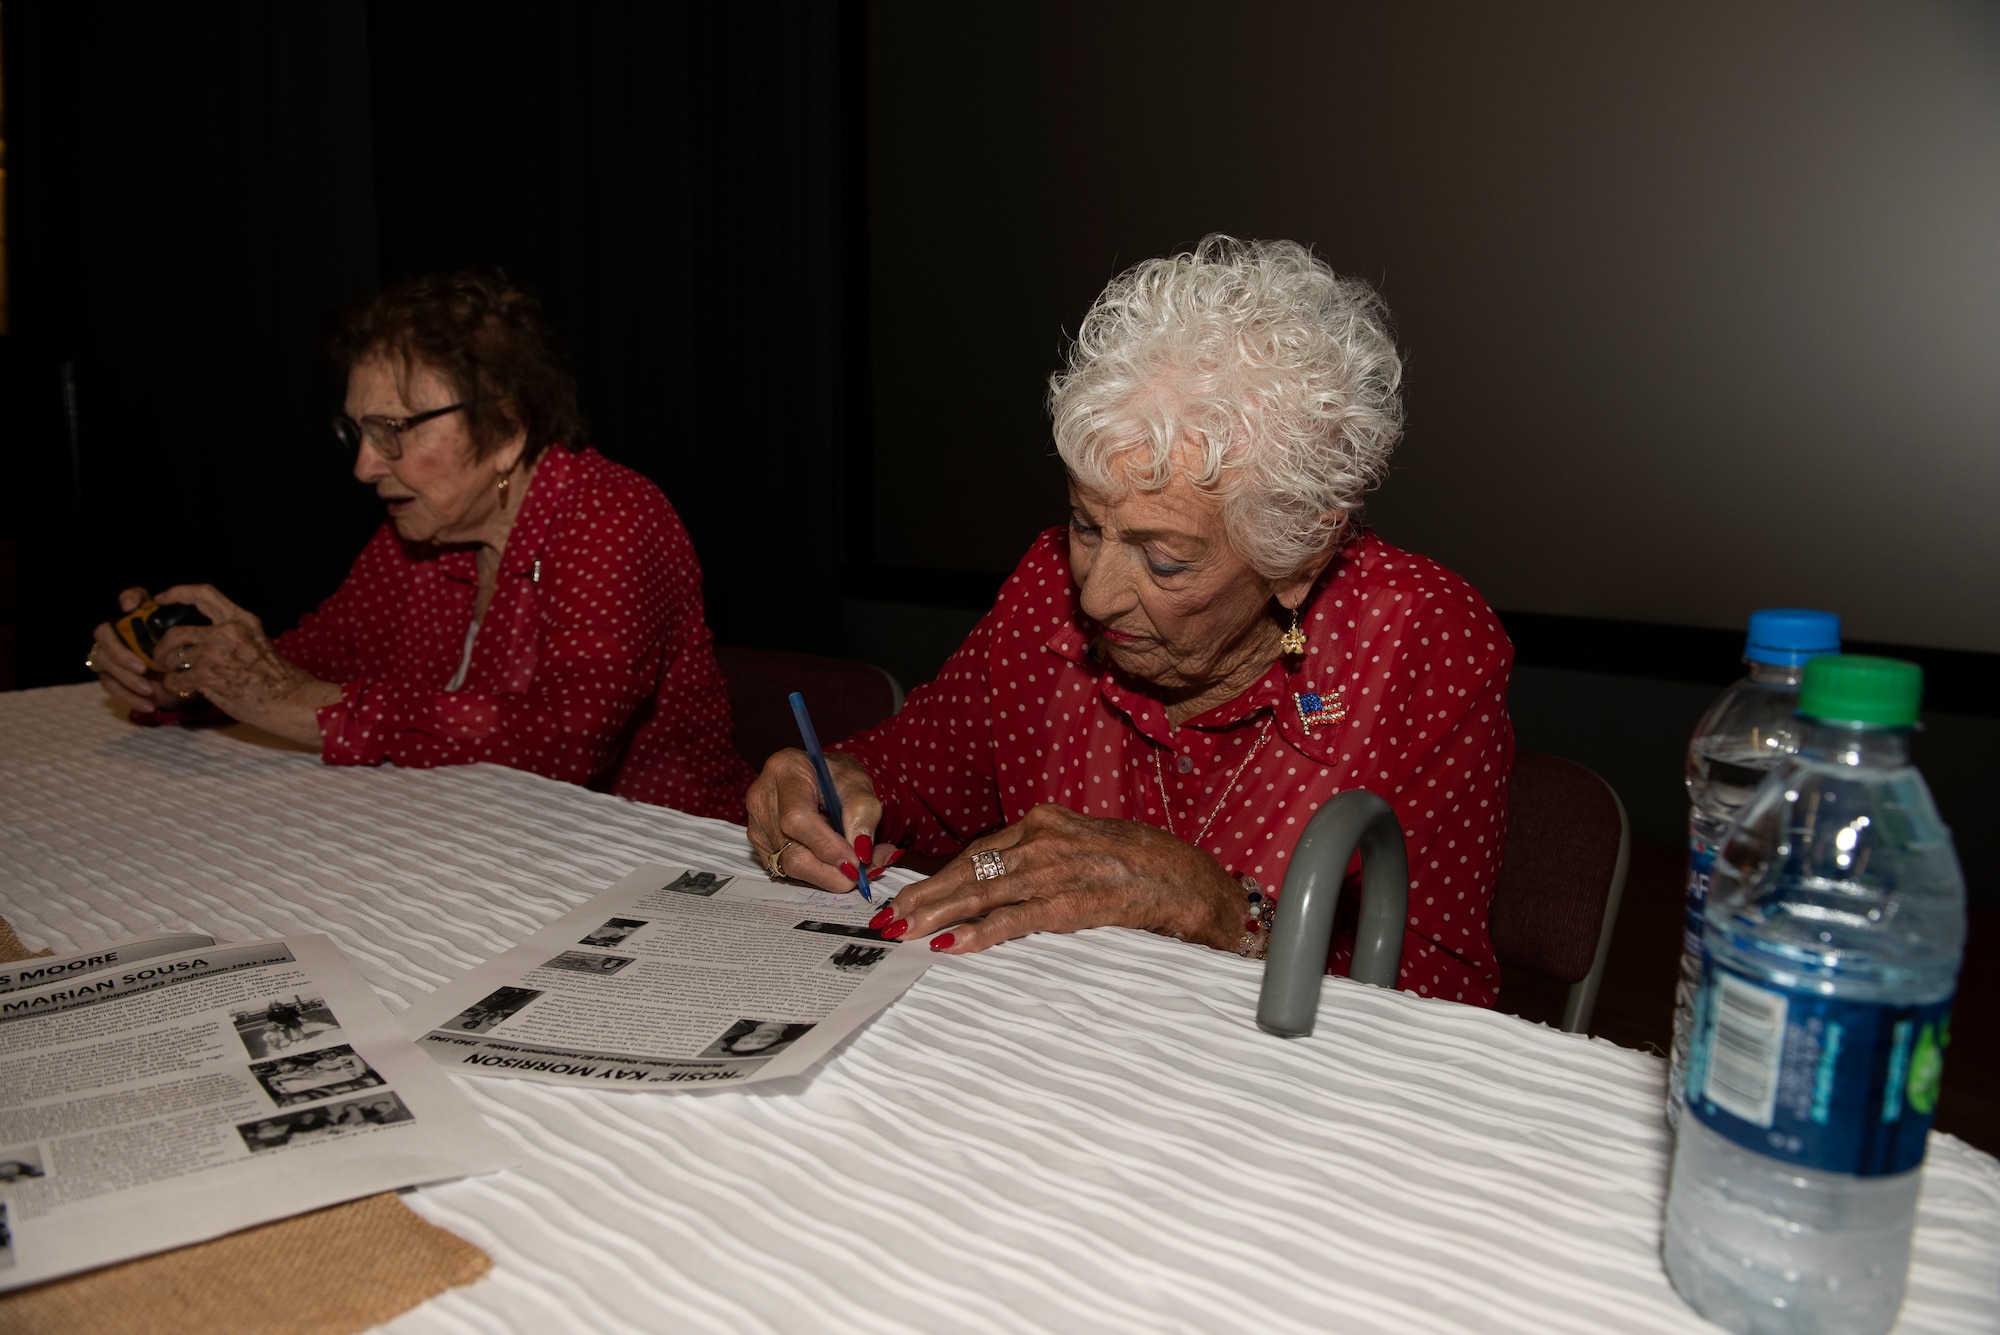 Kay Morrison, 95, signs a print out of her biography June 25, 2019, at Travis Air Force Base, California. Morrison is one of the many women known as ‘Rosie the Riveter’ as she worked as a welder in the Richmond, California, Kaiser Shipyard from 1943 – 1945. During a visit to Travis AFB, she and three other Rosies met with 60th Air Mobility Wing leadership, had lunch with Airmen and shared their experiences. (U.S. Air Force photo by Tech. Sgt. James Hodgman)